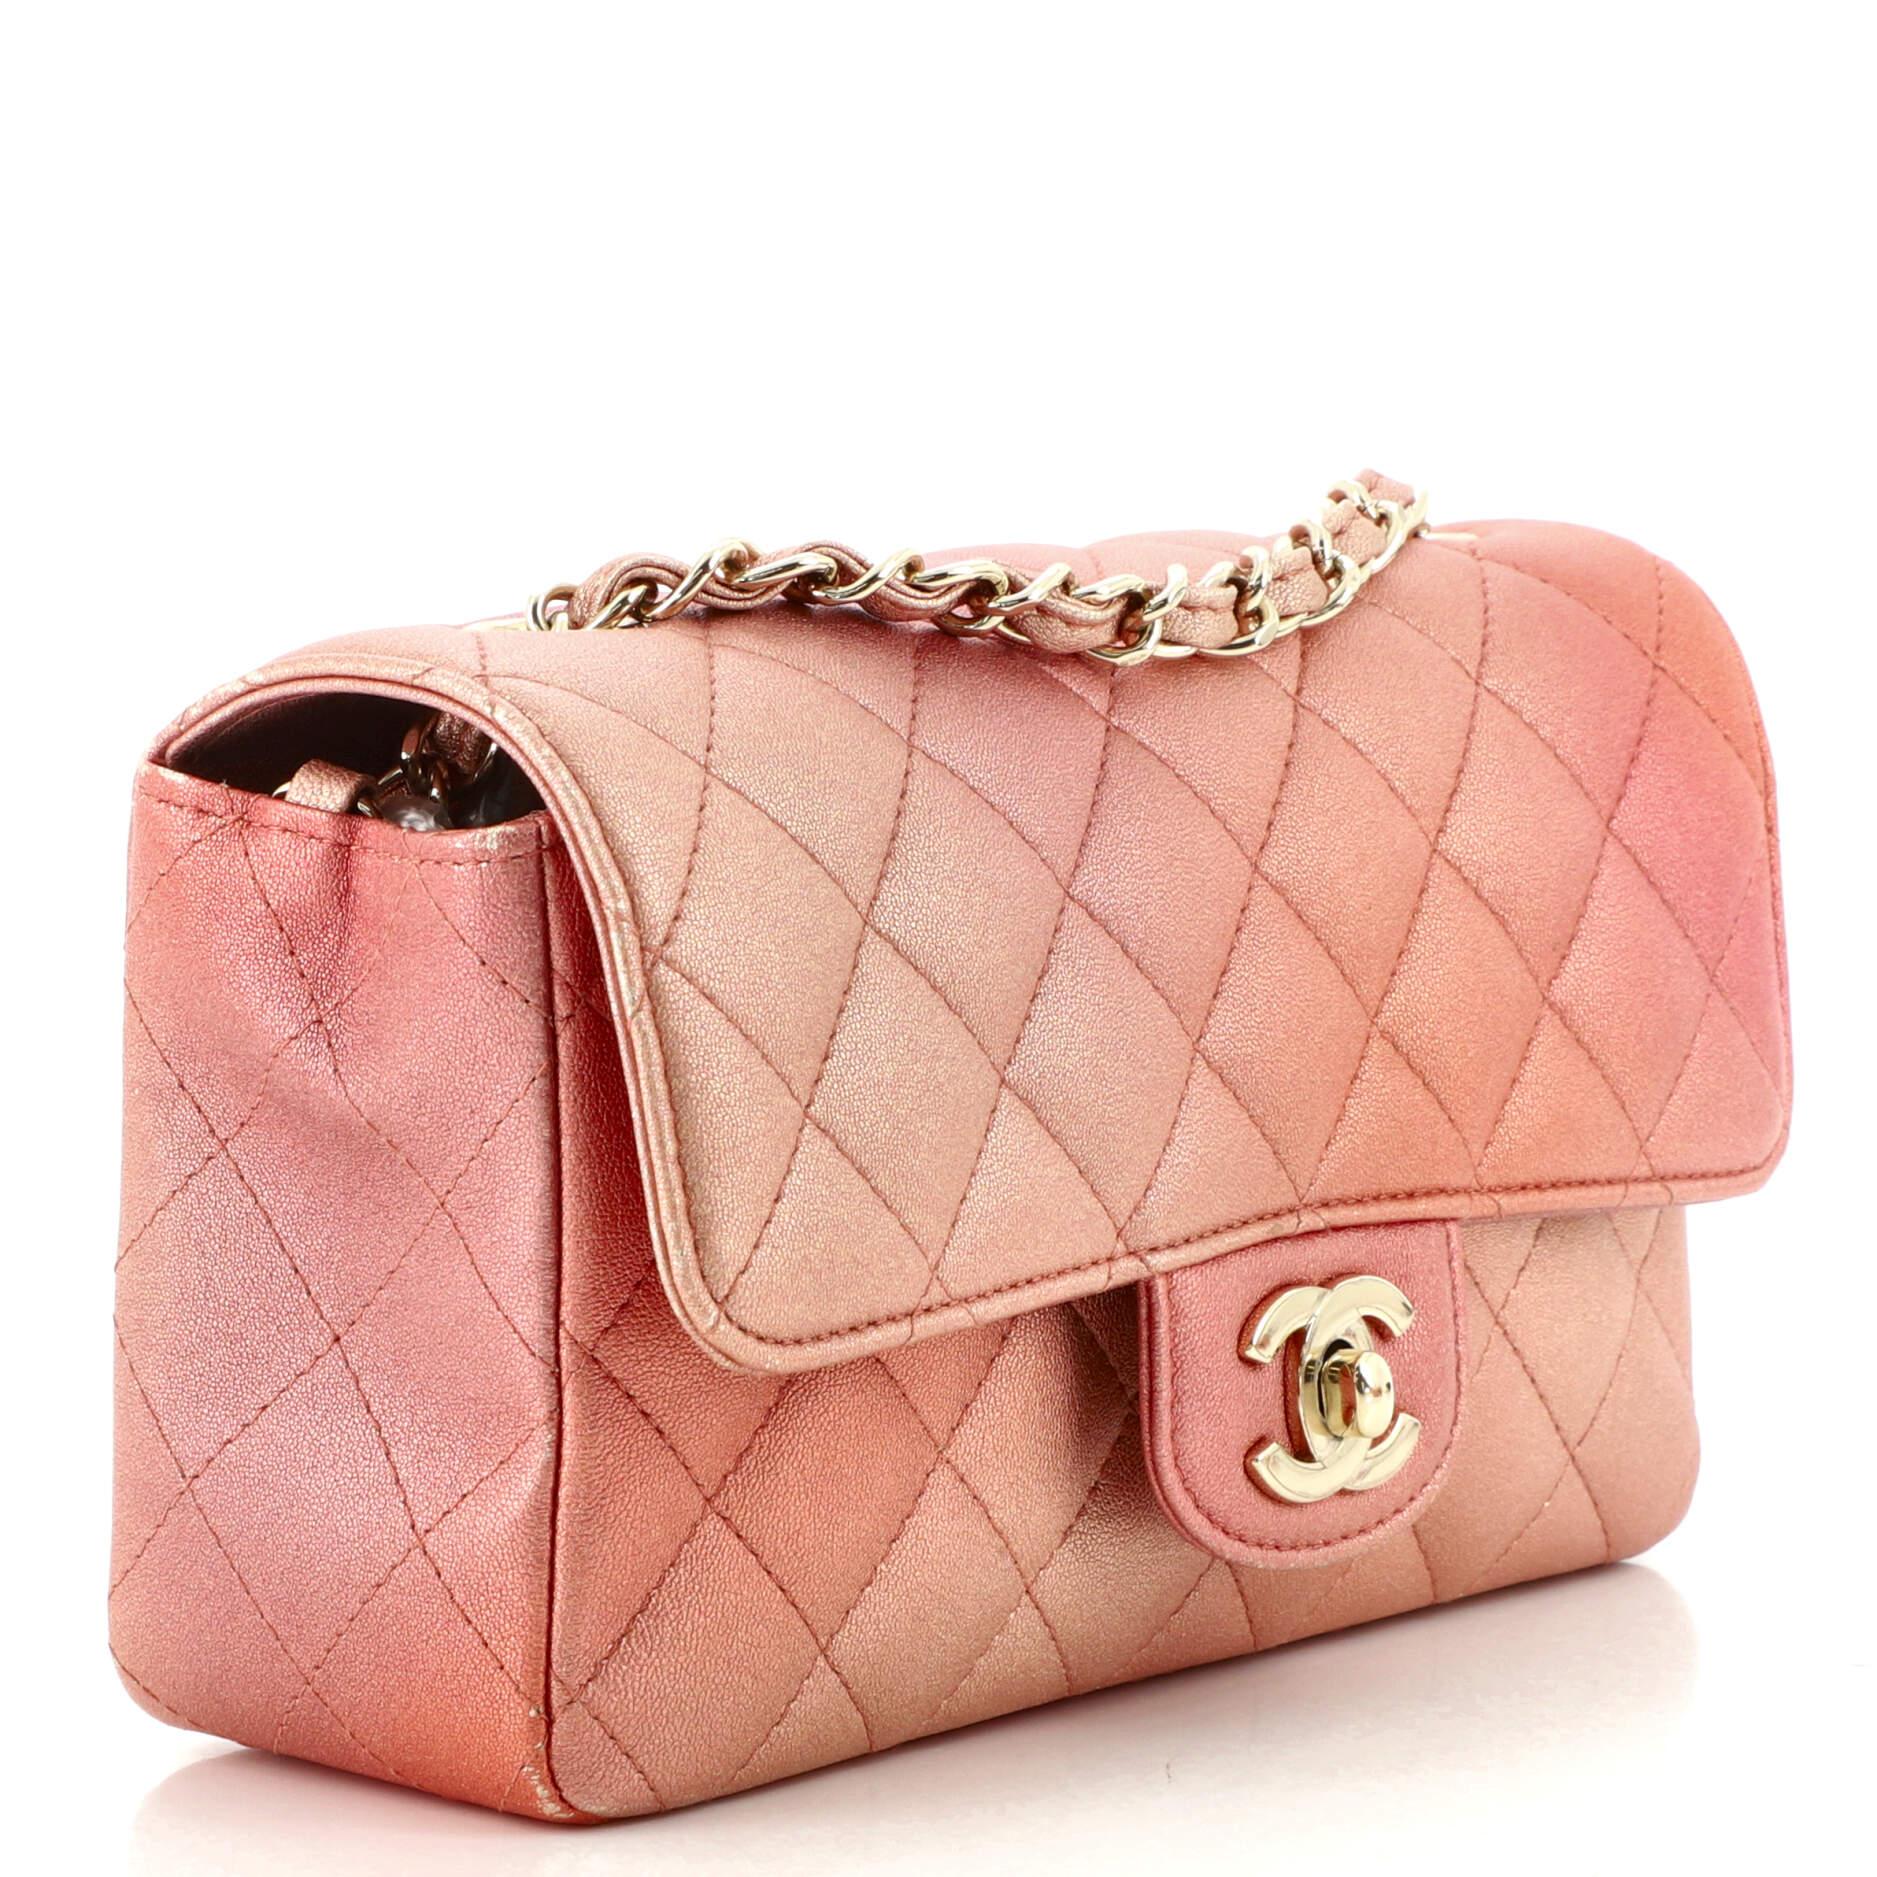 chanel pink ombre bag